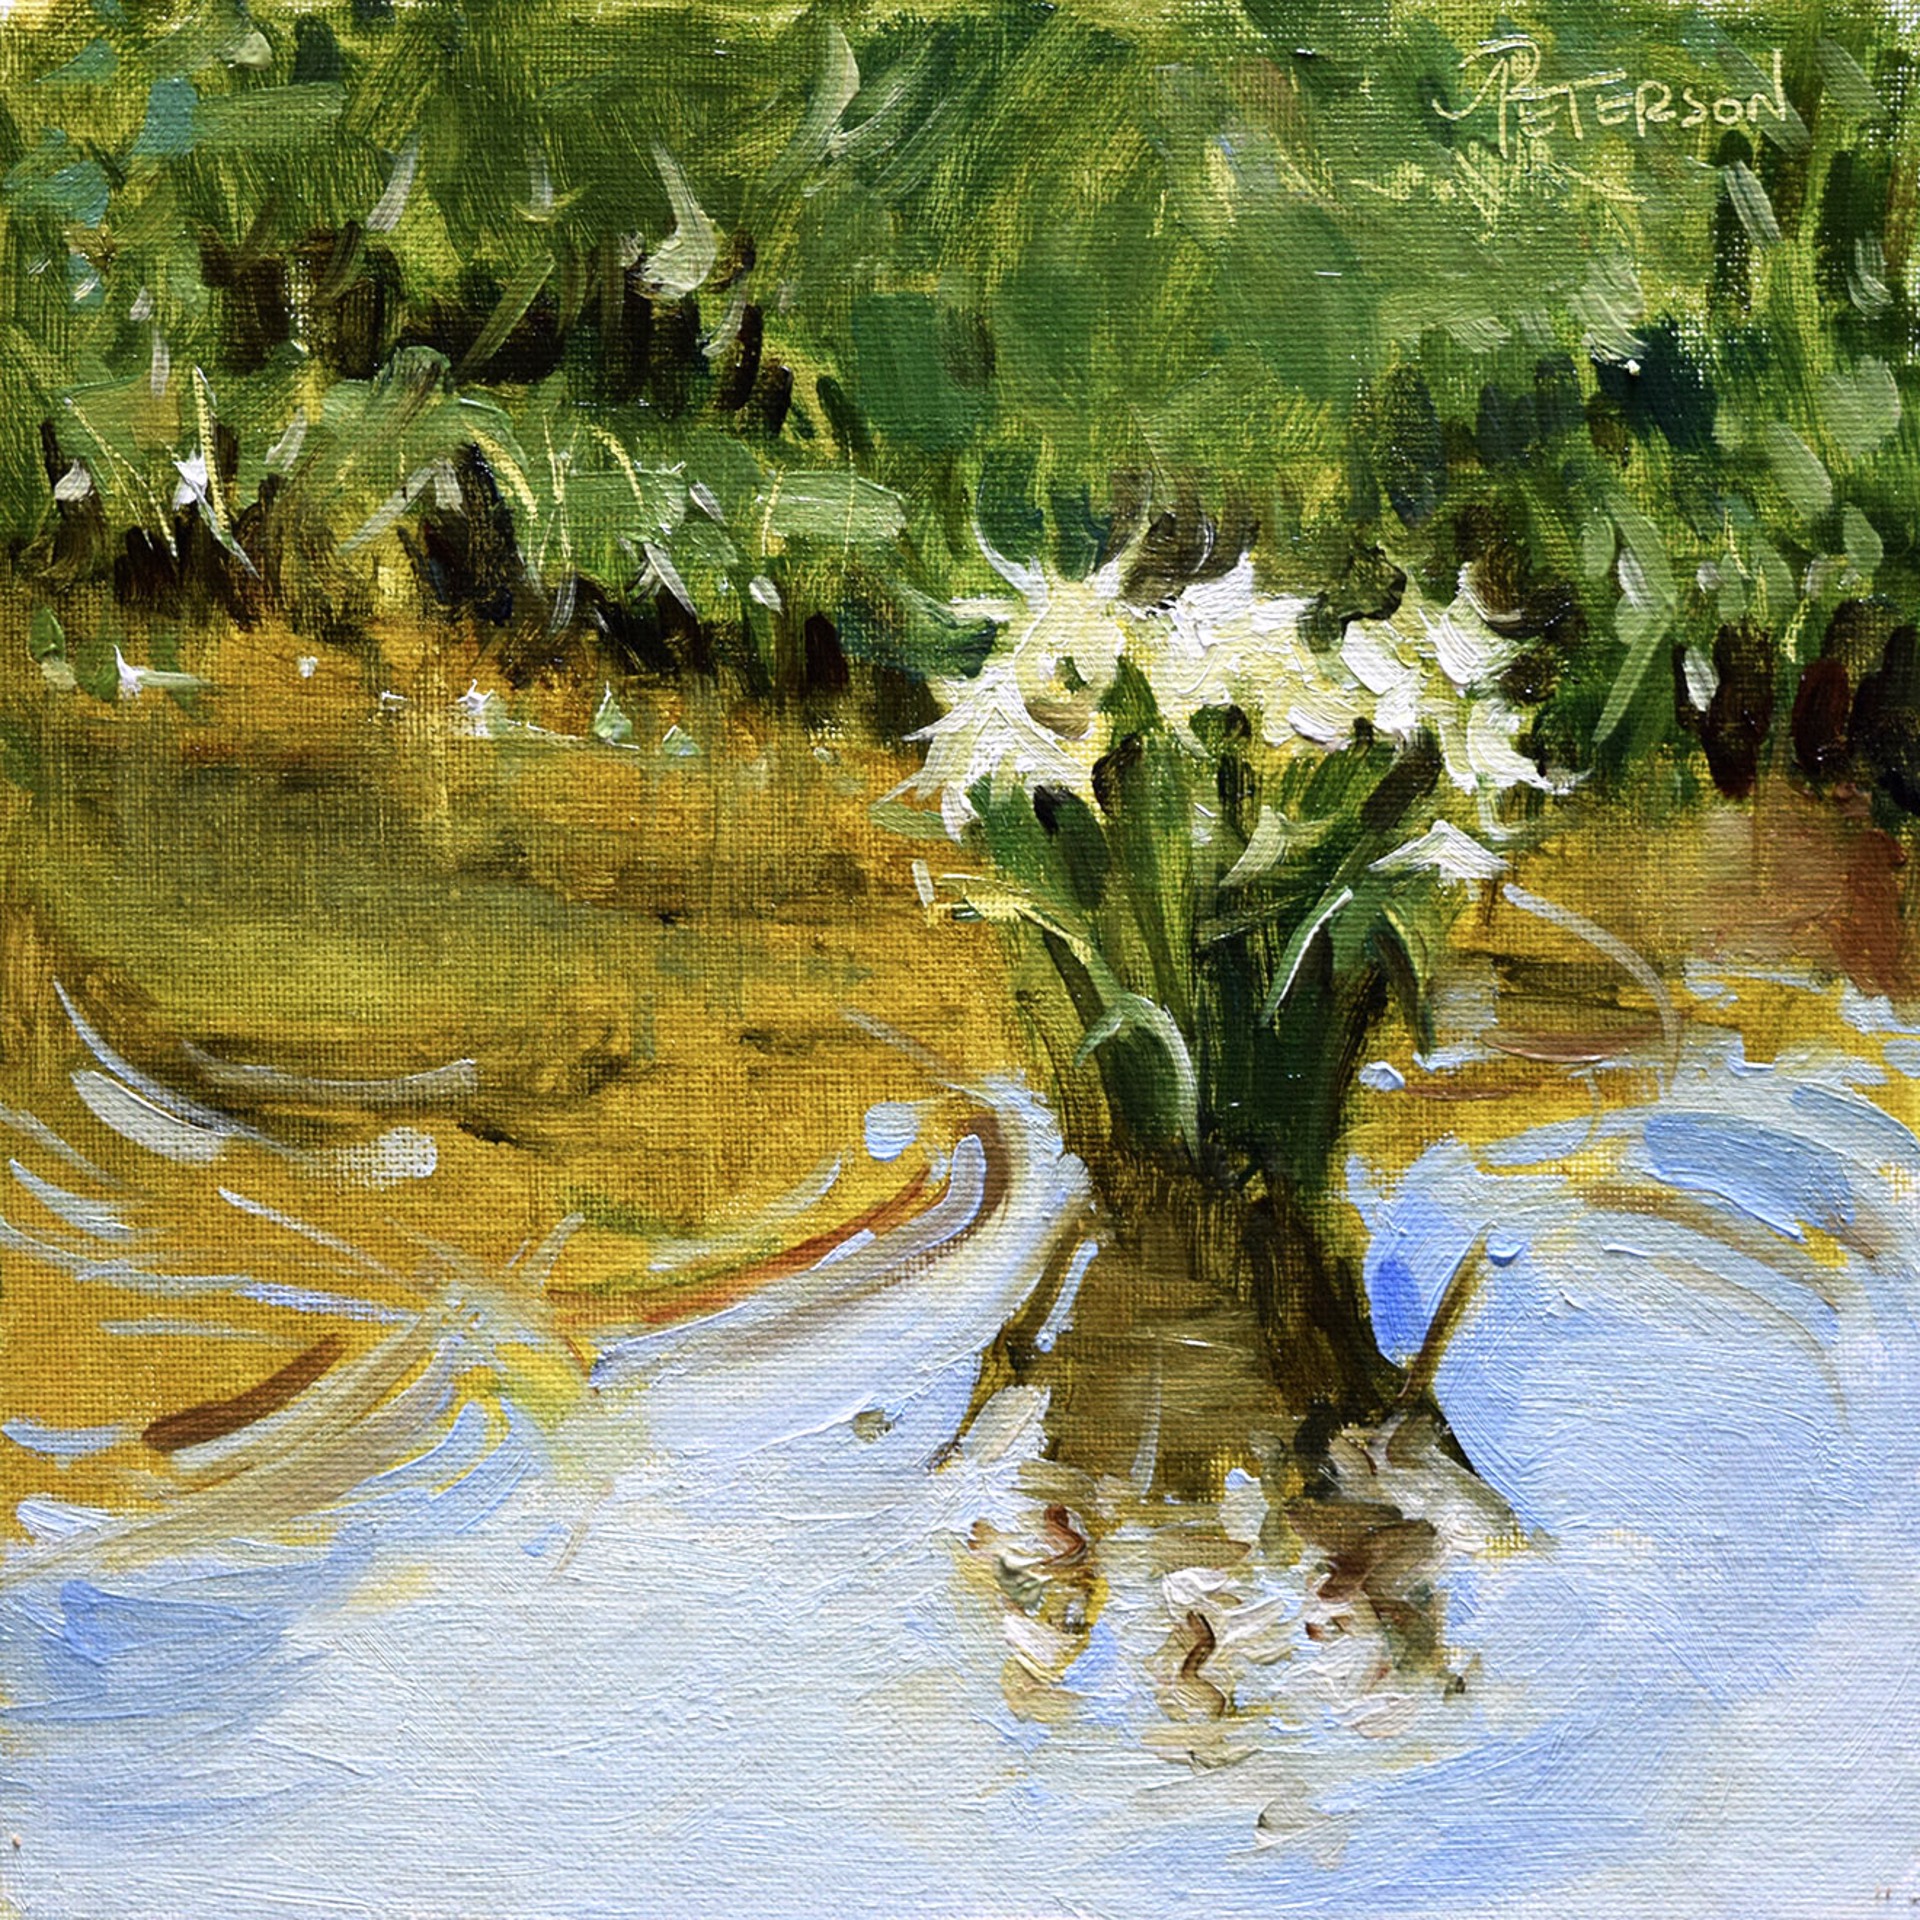 Cahaba Lily Reflections by Amy R. Peterson